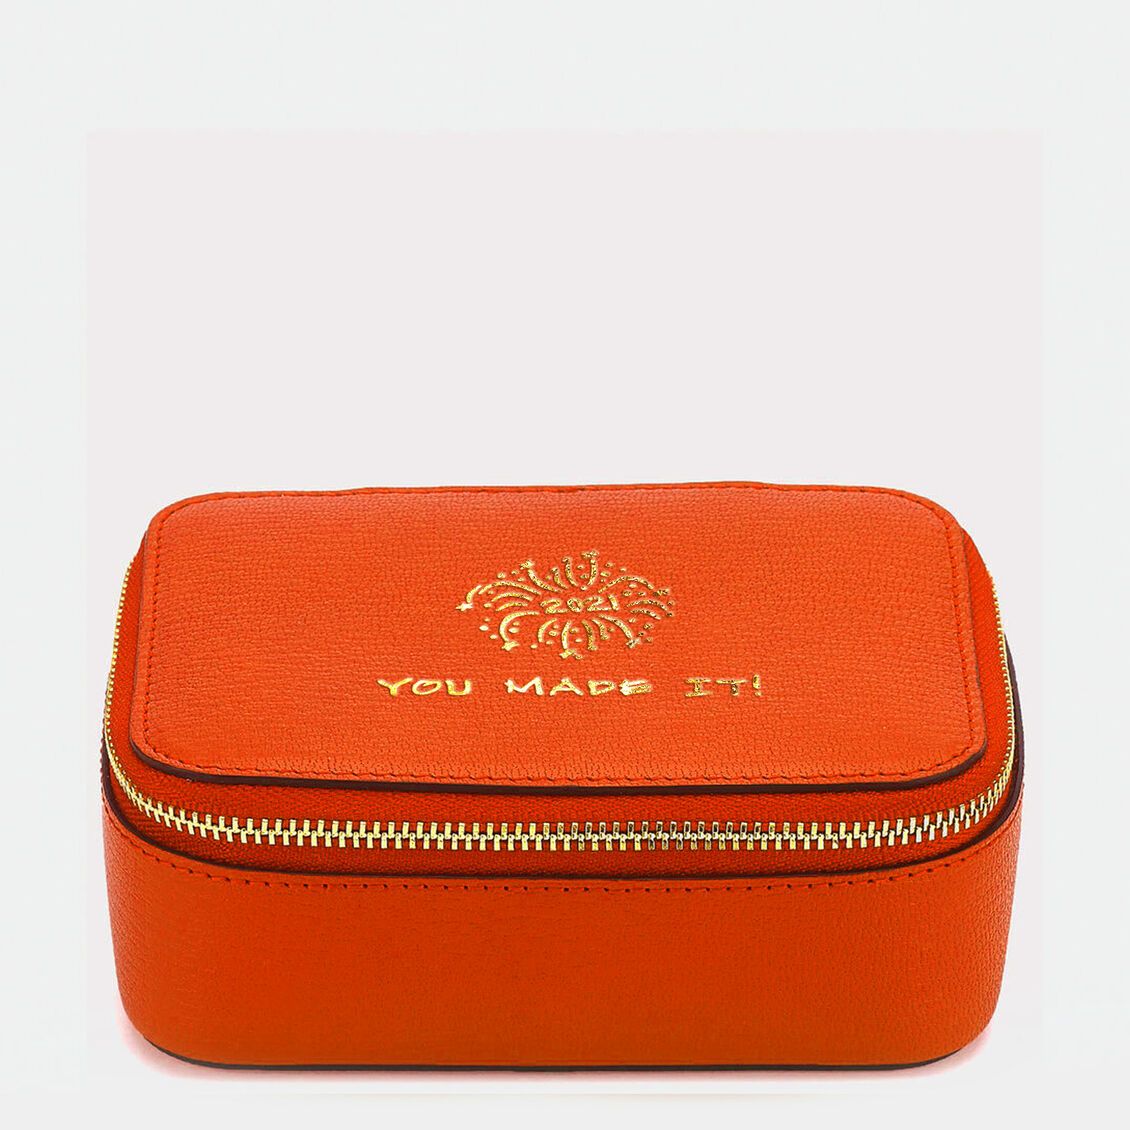 Yes Wow Box Medium -

                  
                    Capra Leather in Clementine -
                  

                  Anya Hindmarch US
